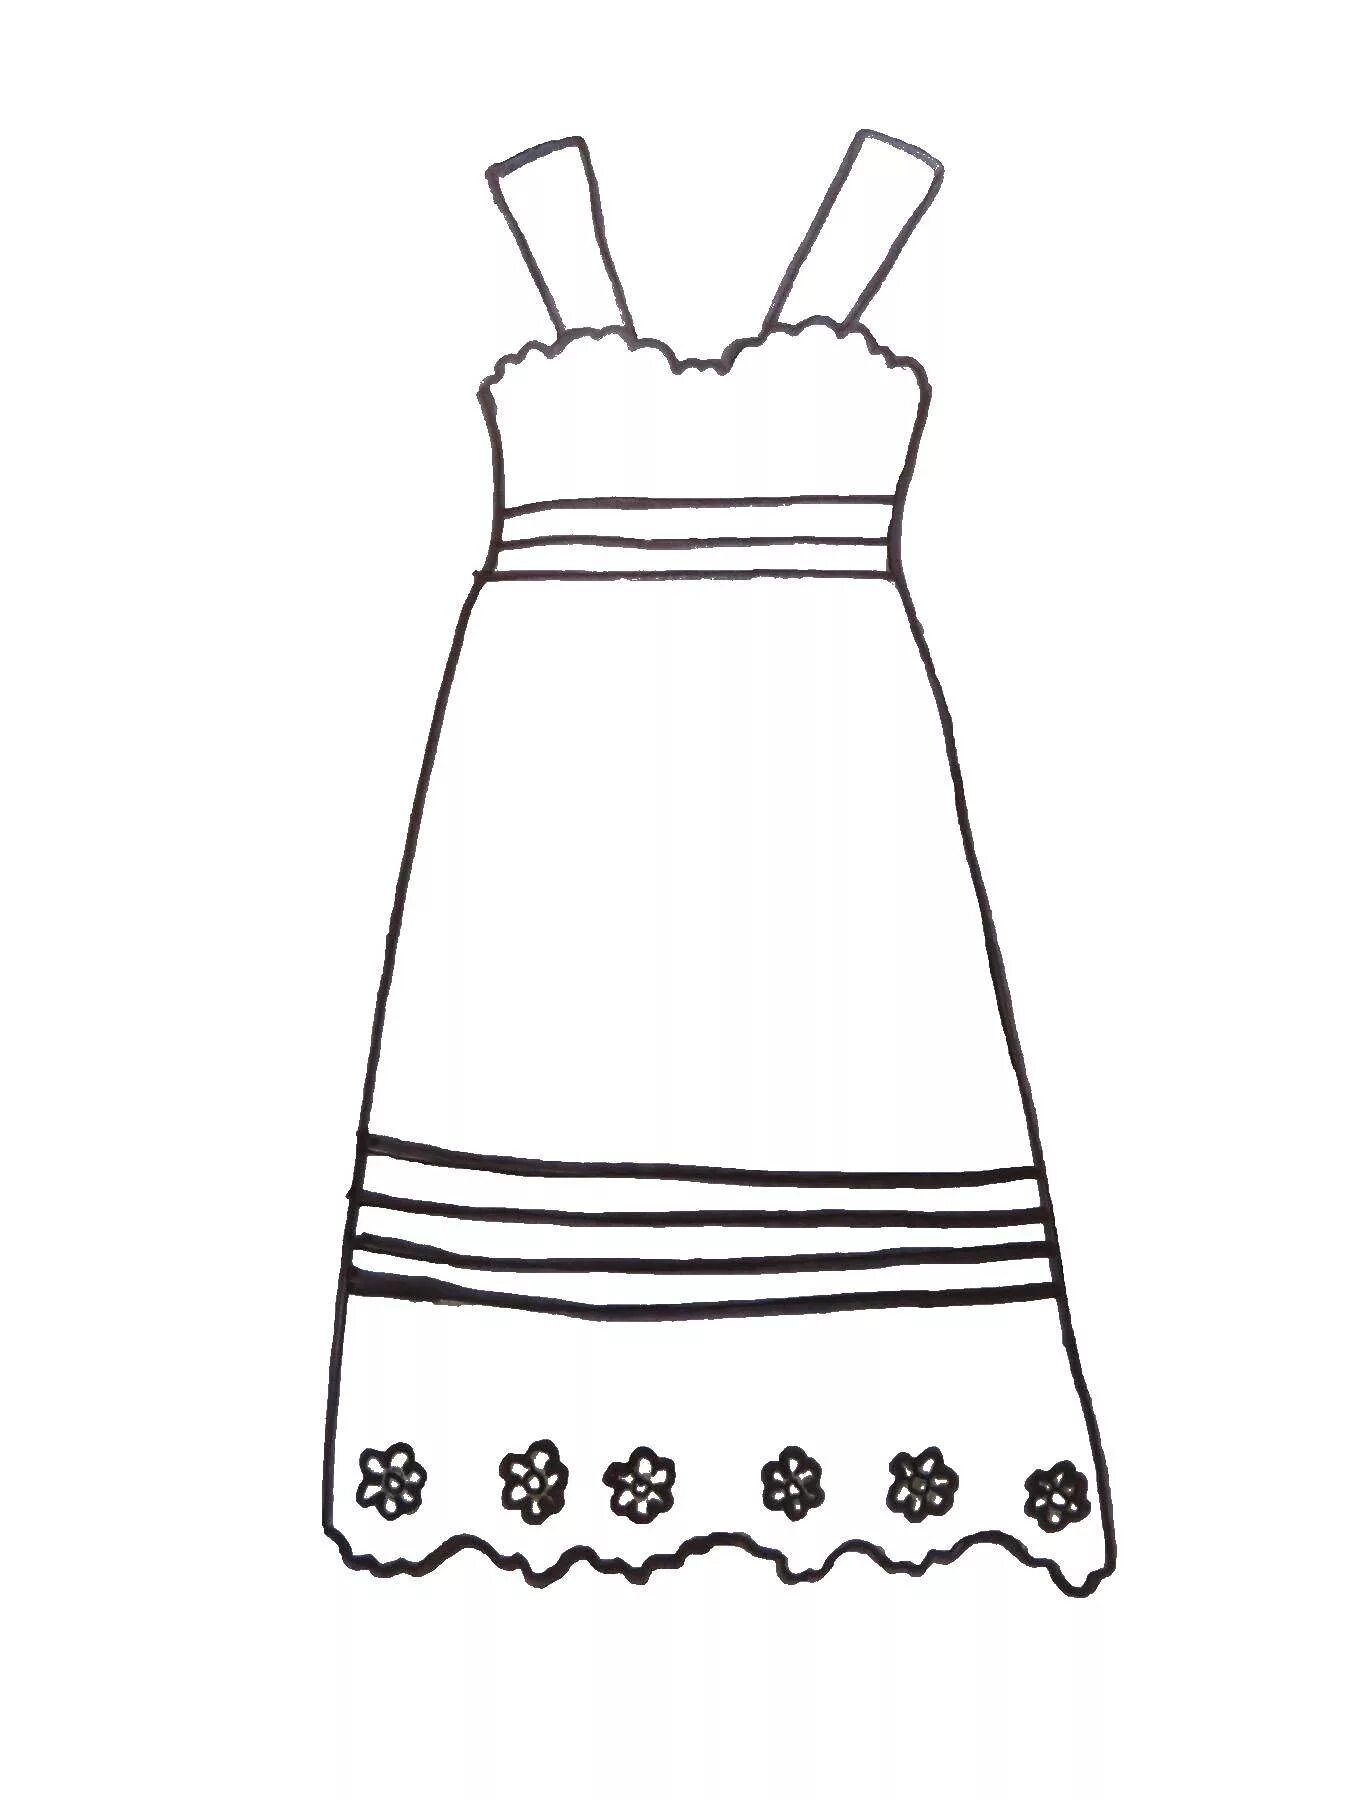 Coloring book exotic sundress for children